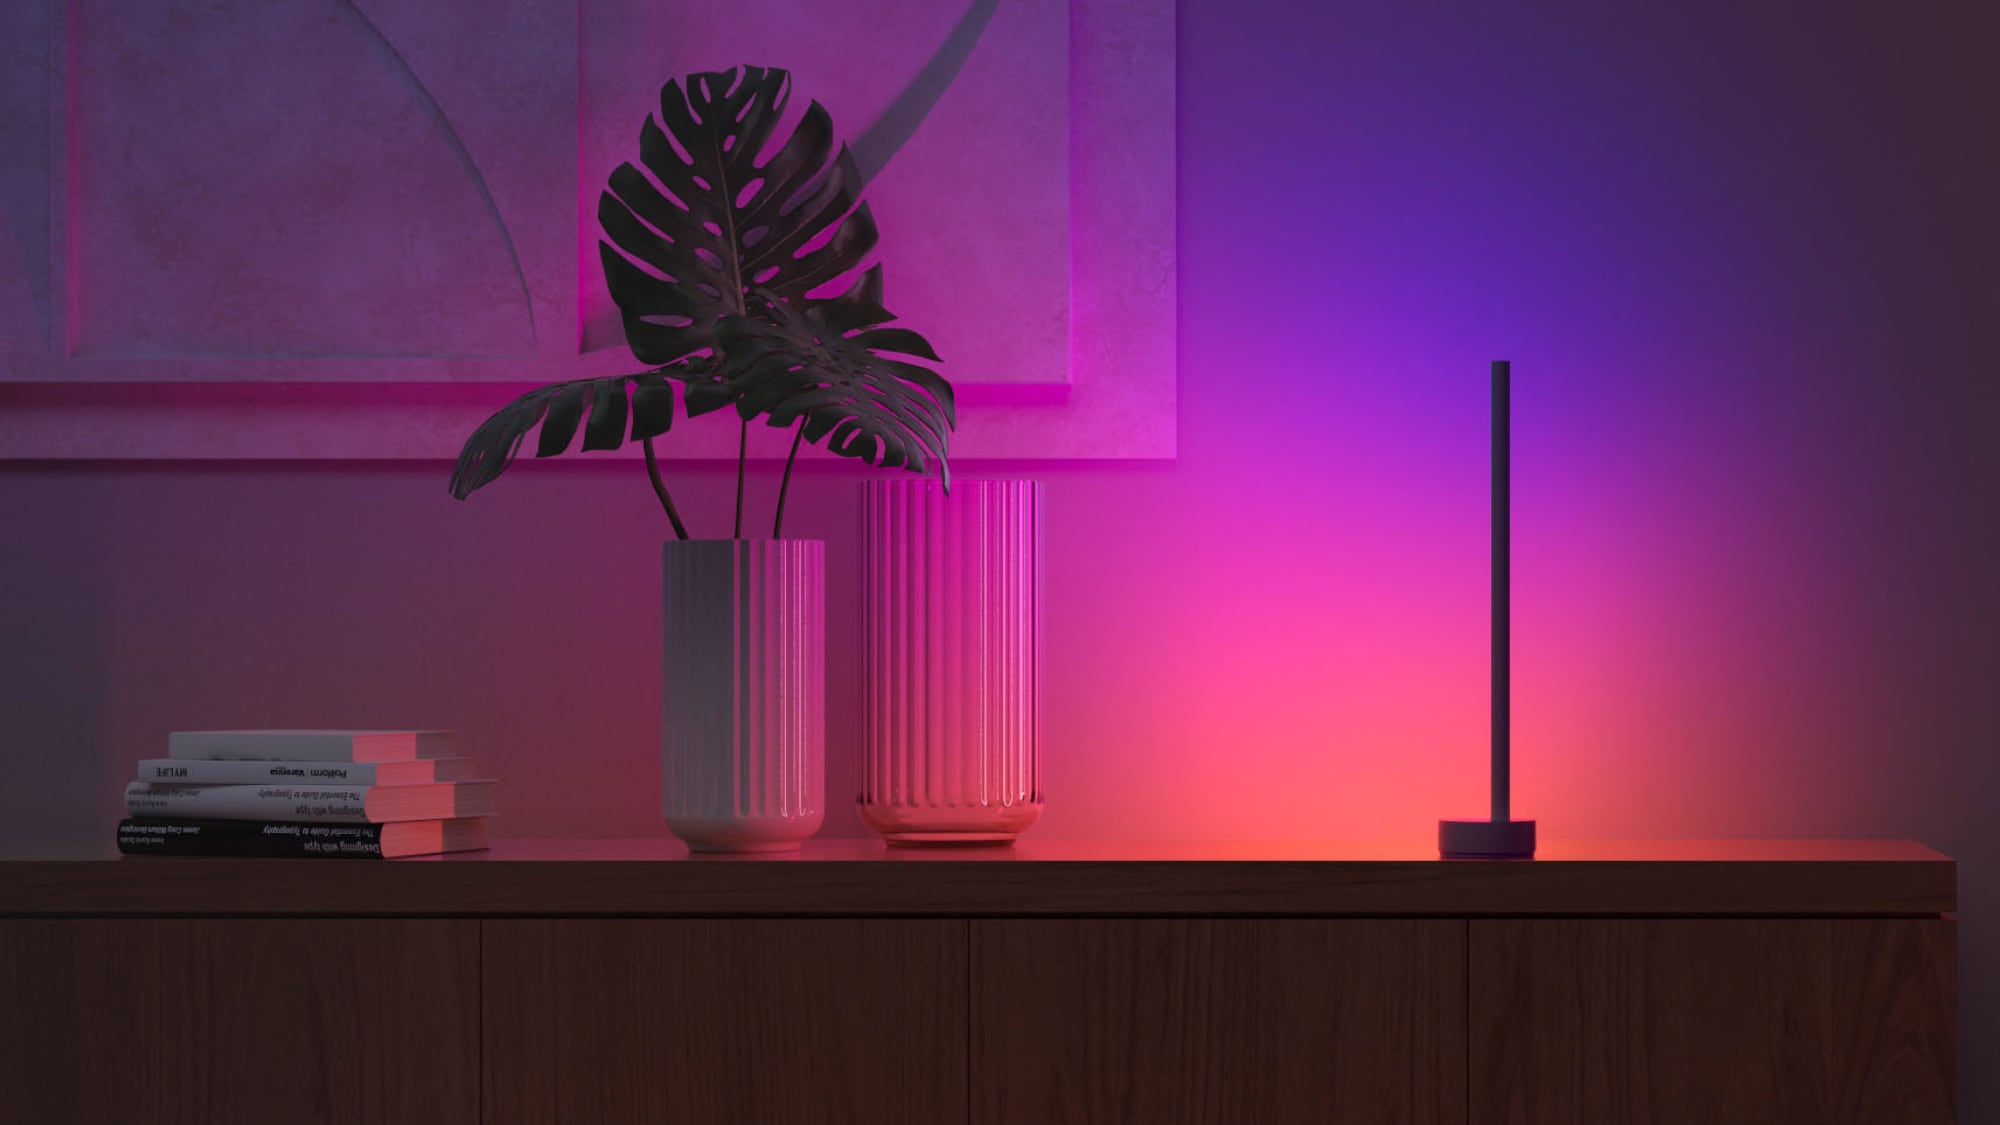 Save Up to 40% on Philips Hue Smart Lighting This Black Friday - CNET